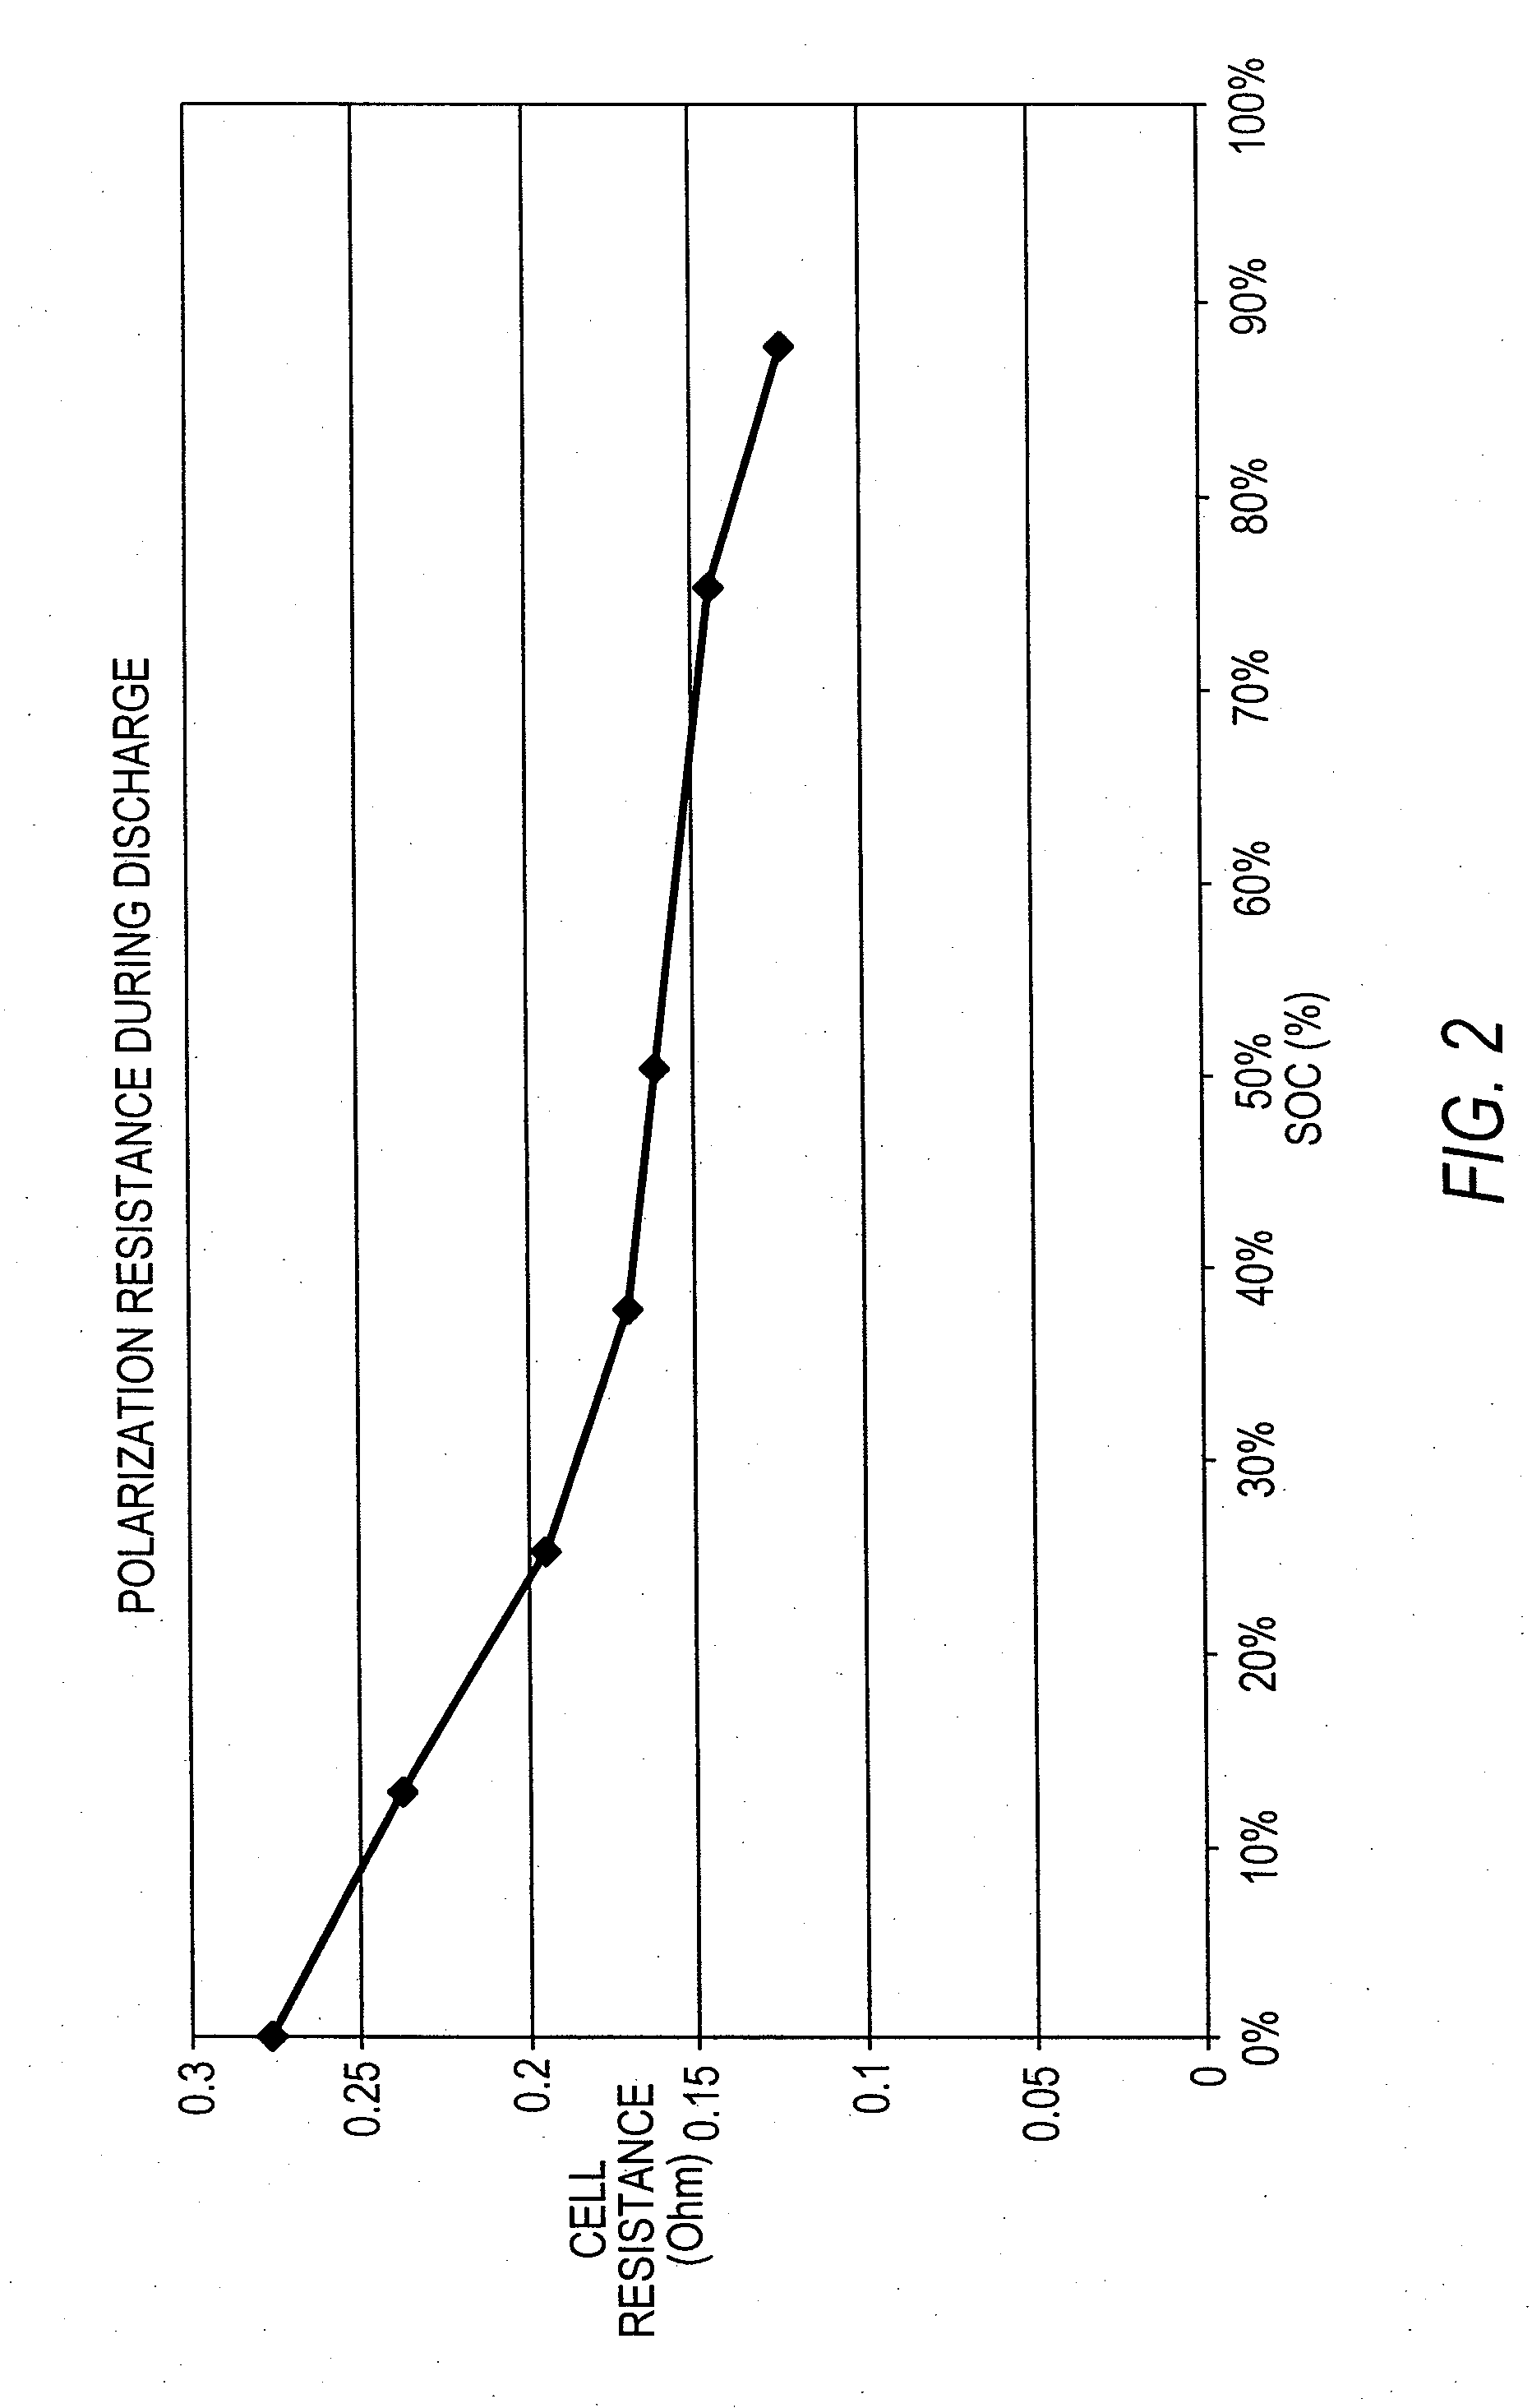 Lithium sulfur rechargeable battery fuel gauge systems and methods